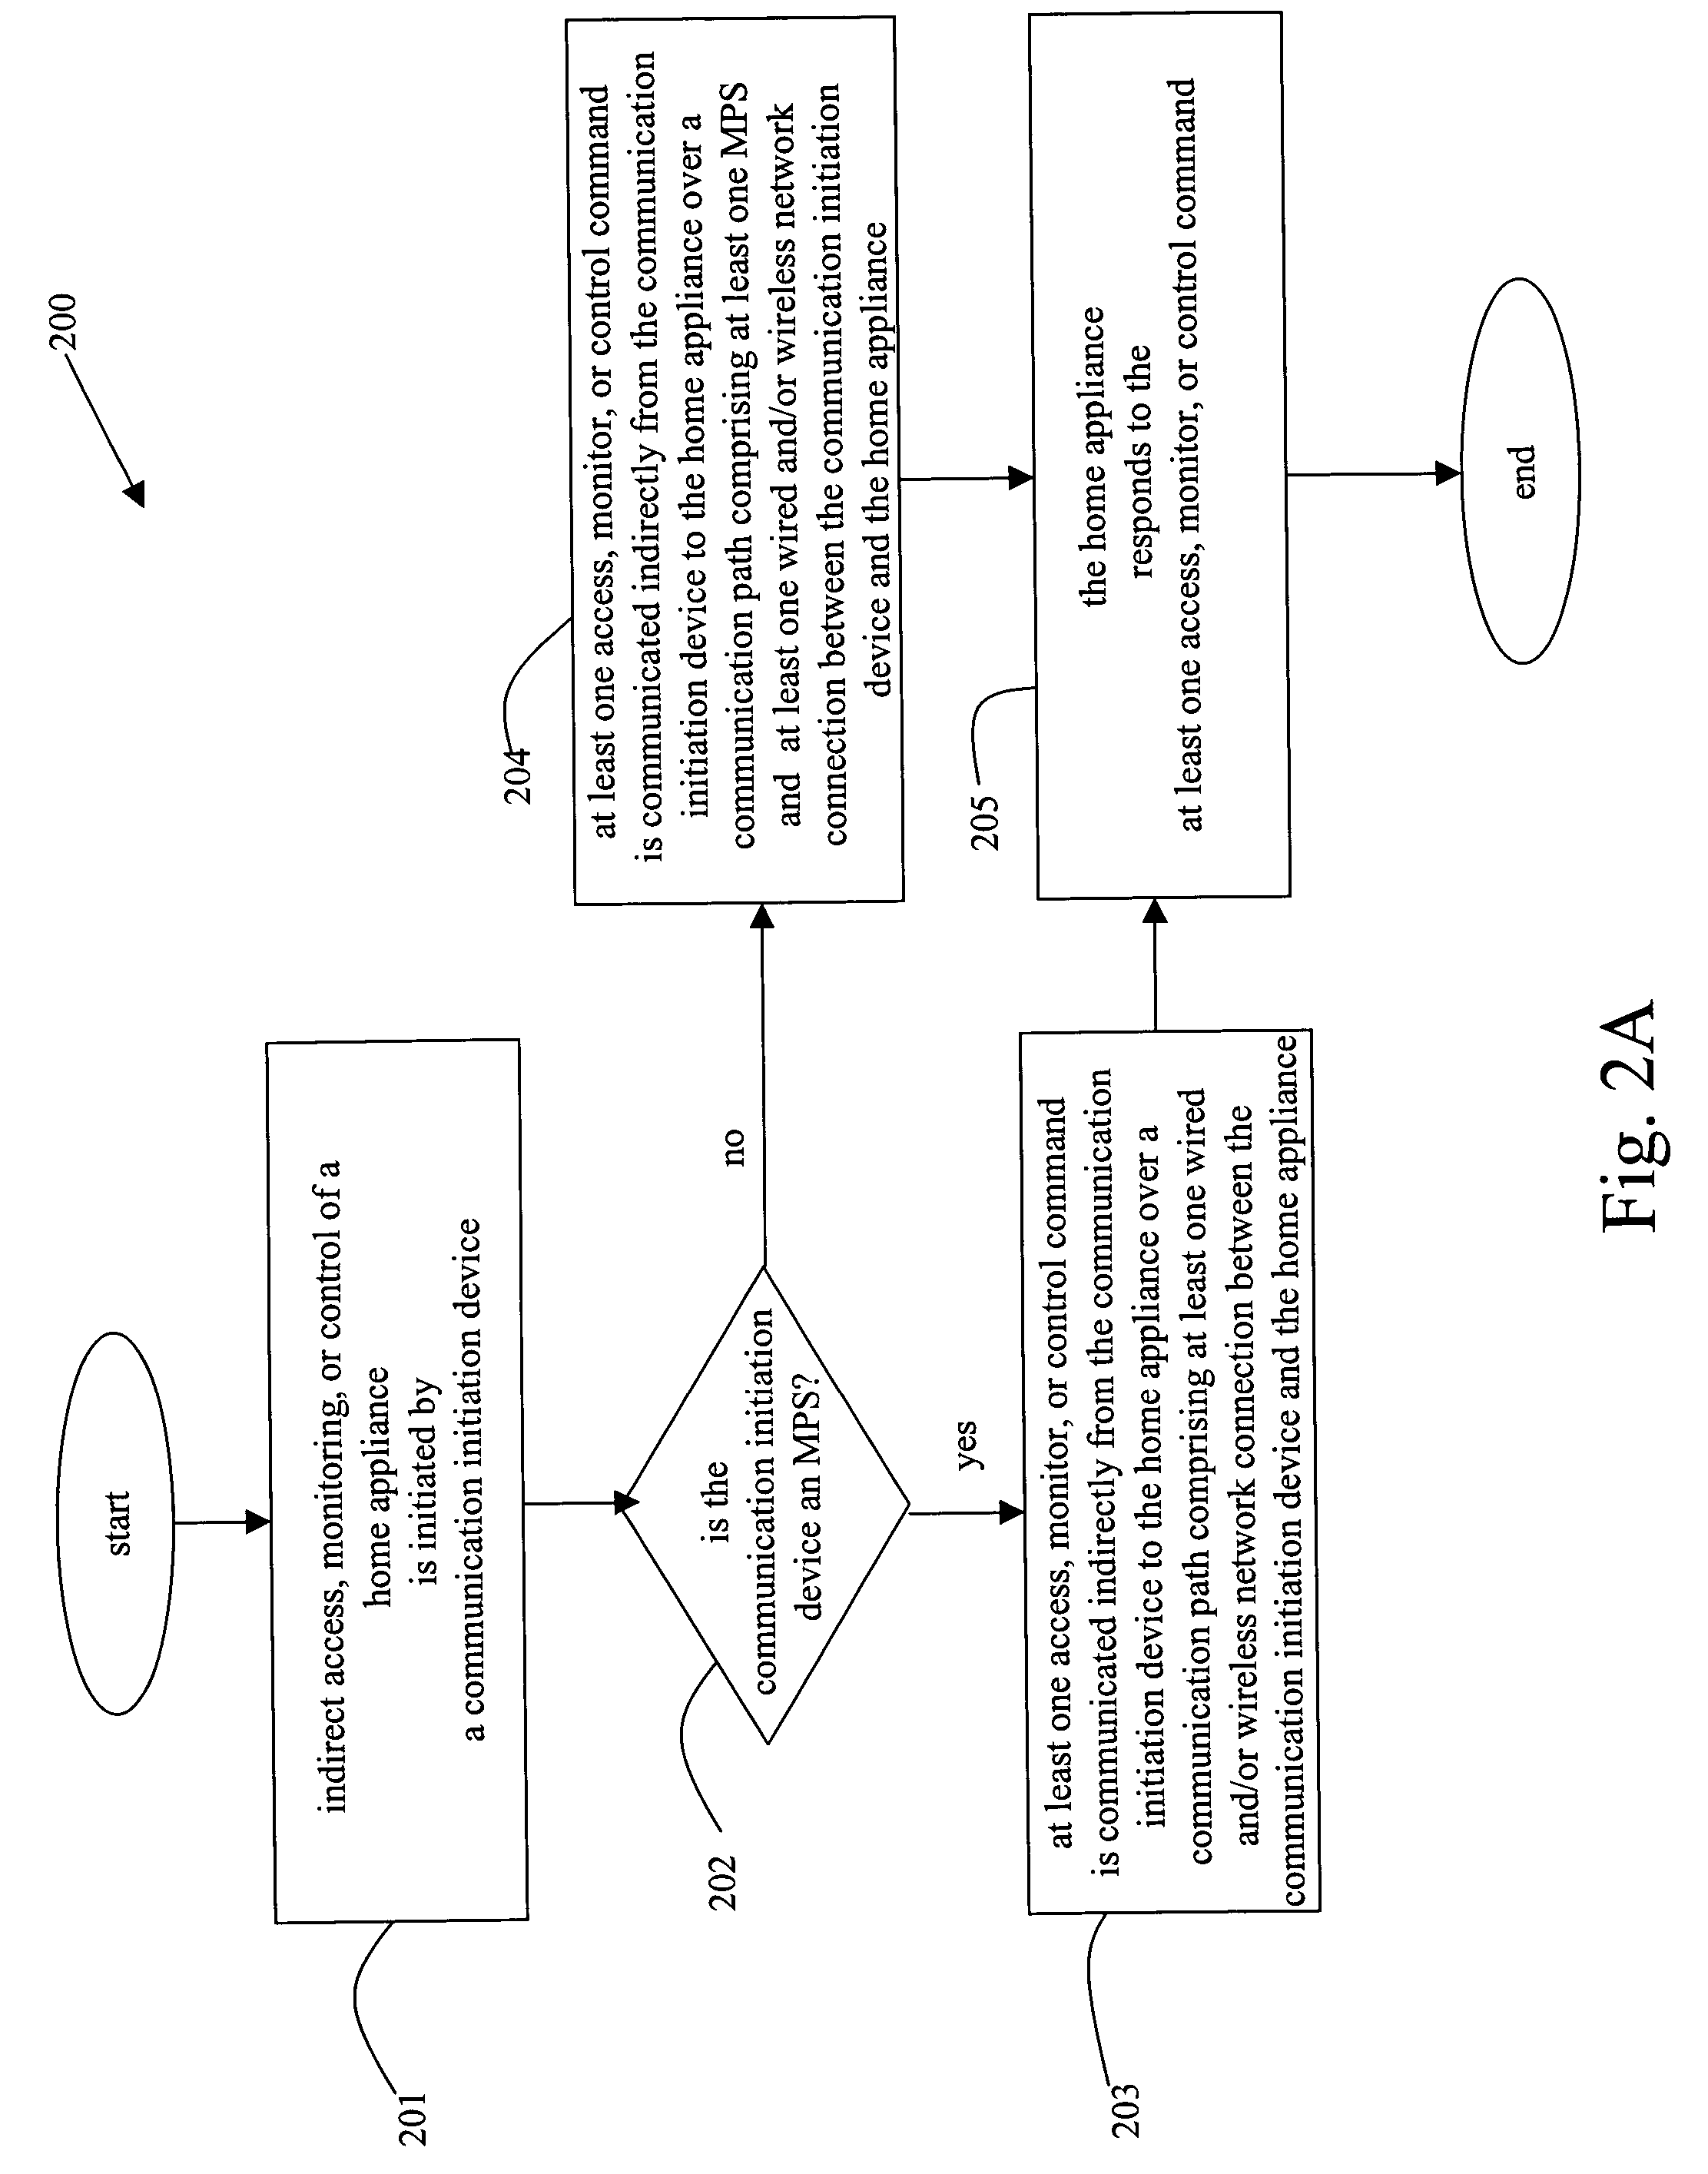 Access, monitoring, and control of appliances via a media processing system